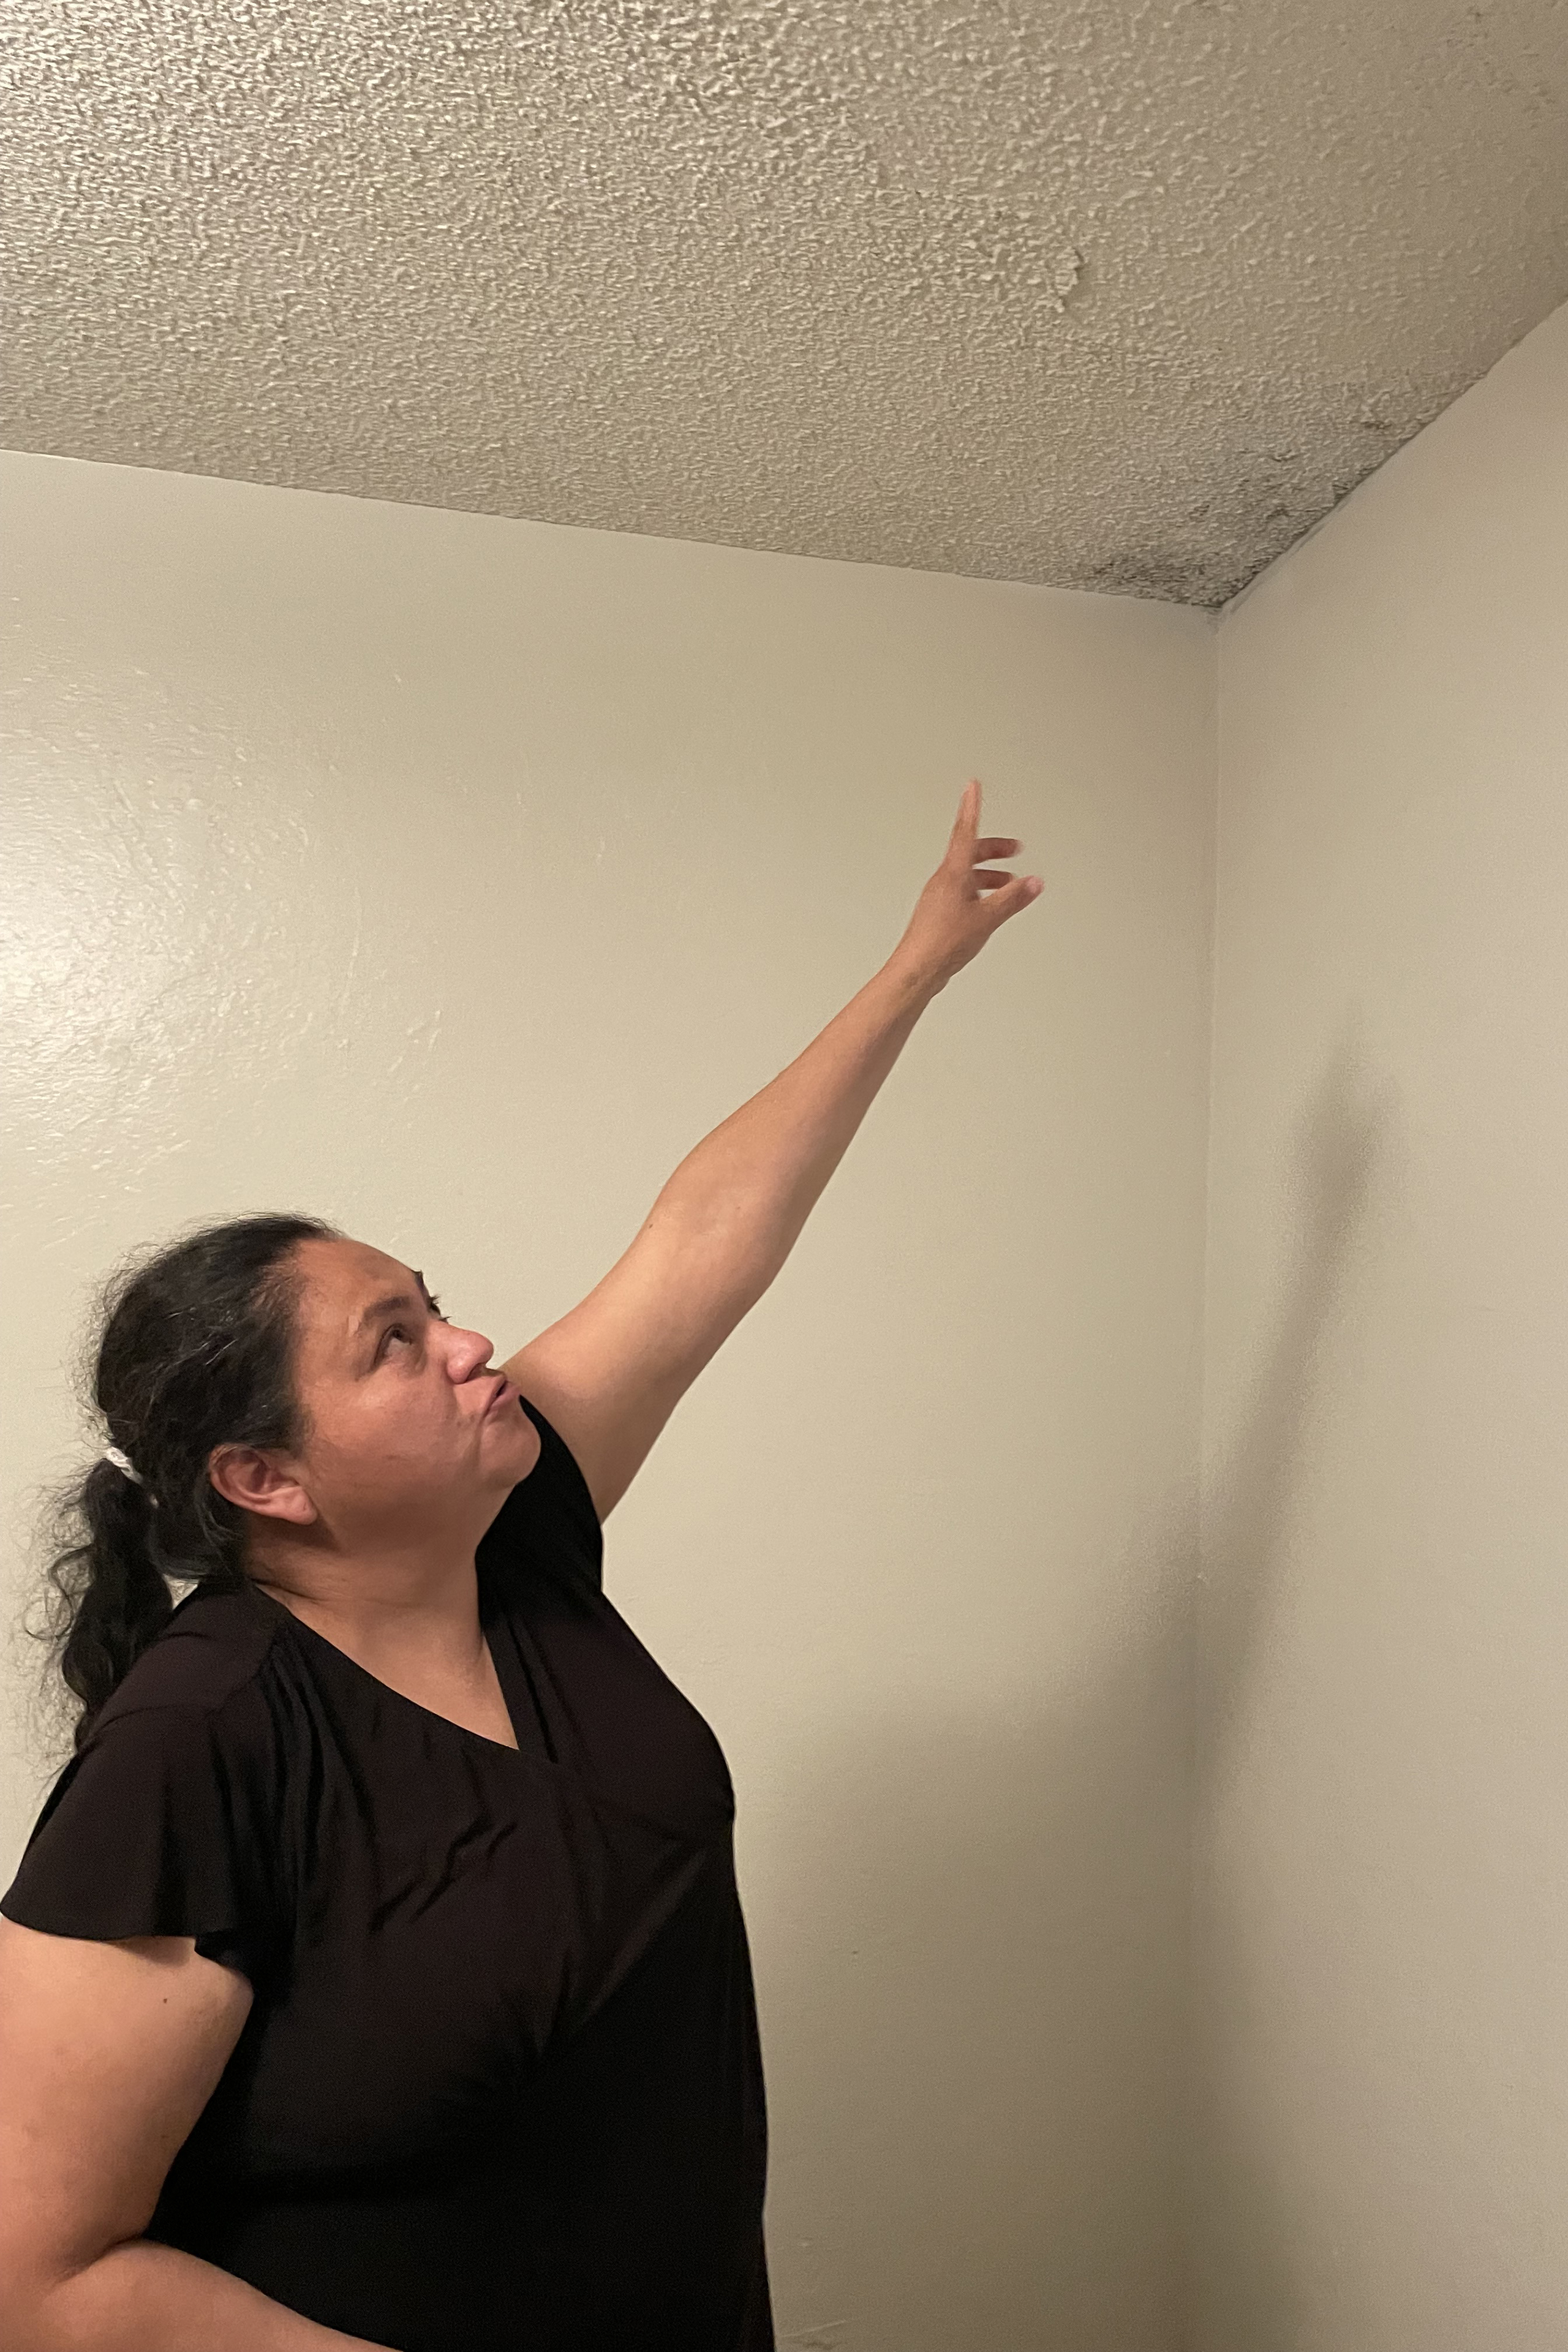 A woman points to the corner of a ceiling.